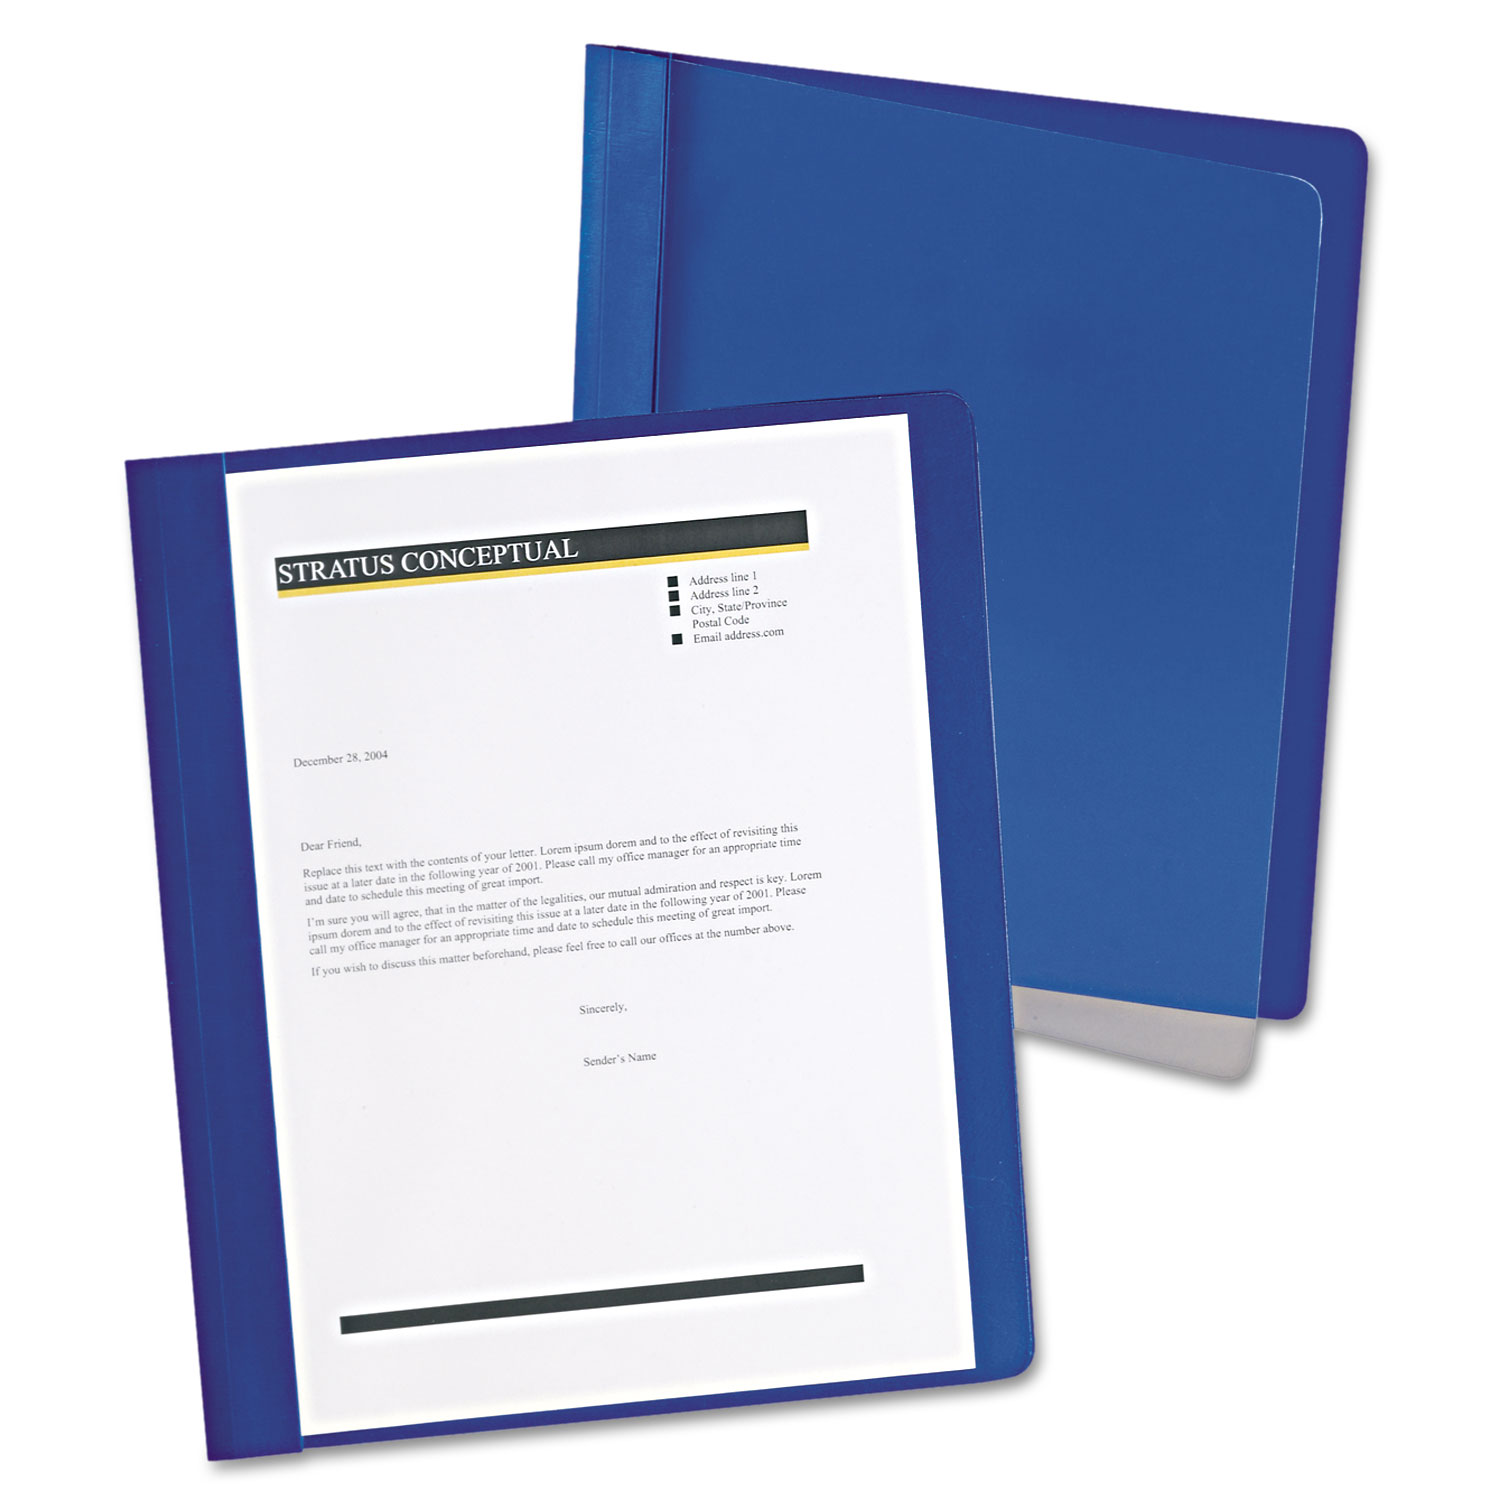 Extra-Wide Clear Front Report Covers, Letter Size, Dark Blue, 25/Box